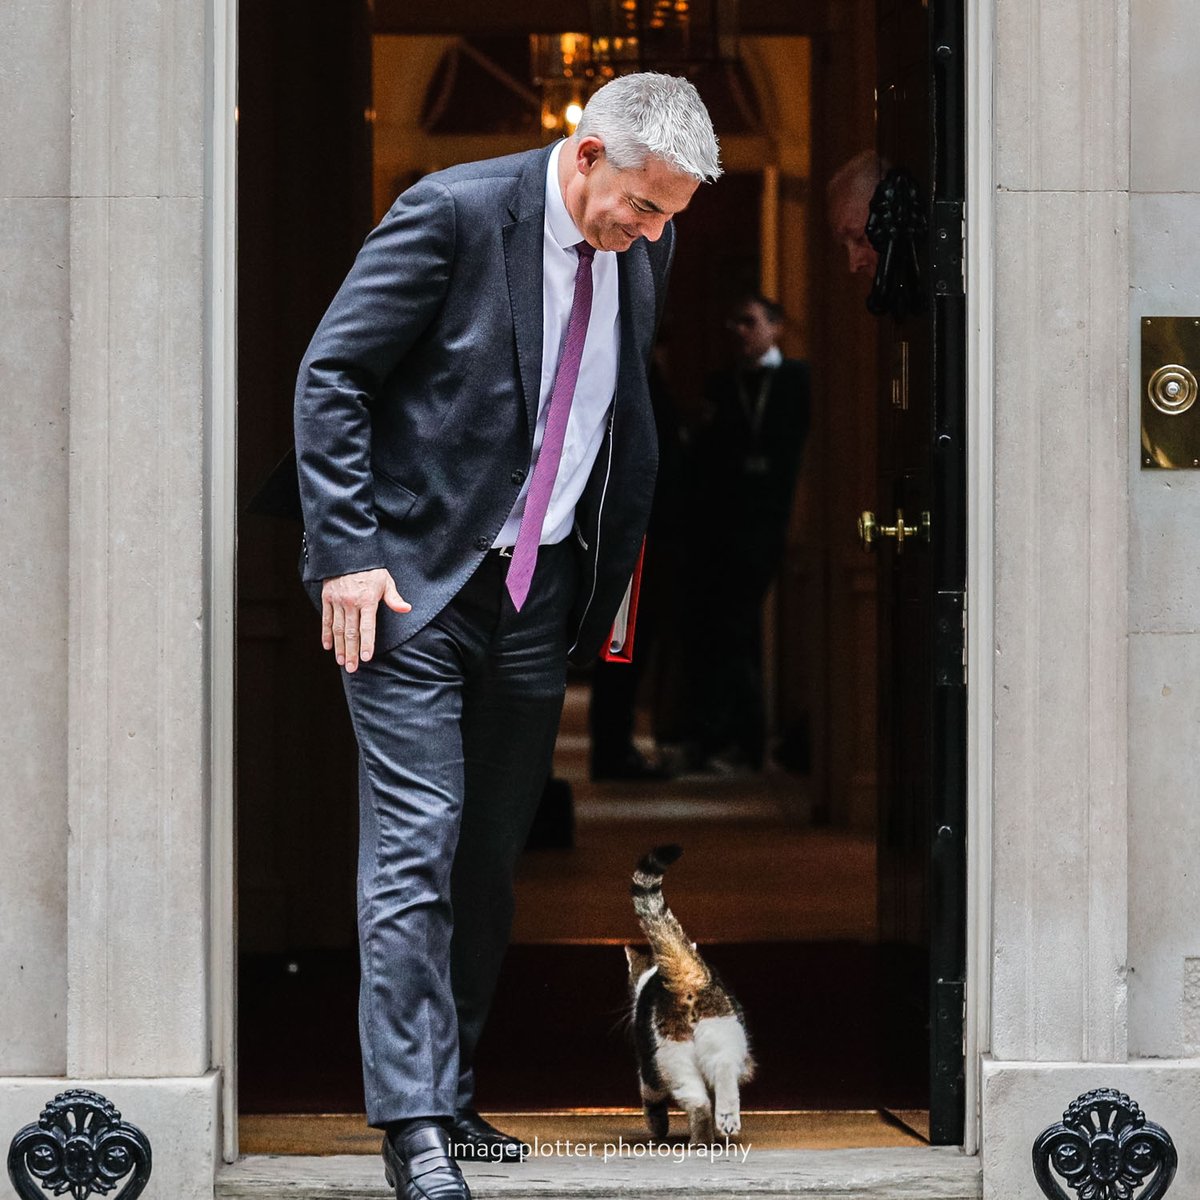 Well, @Number10cat is on form at the moment. Here he is with Science, Tech & Innovation minister Michelle Donelan, being ever the gentleman (or does he have an eye for the ladies?). No such luck for Secretary of State for Health, Steve Barclay, who got the cold cat shoulder.😉